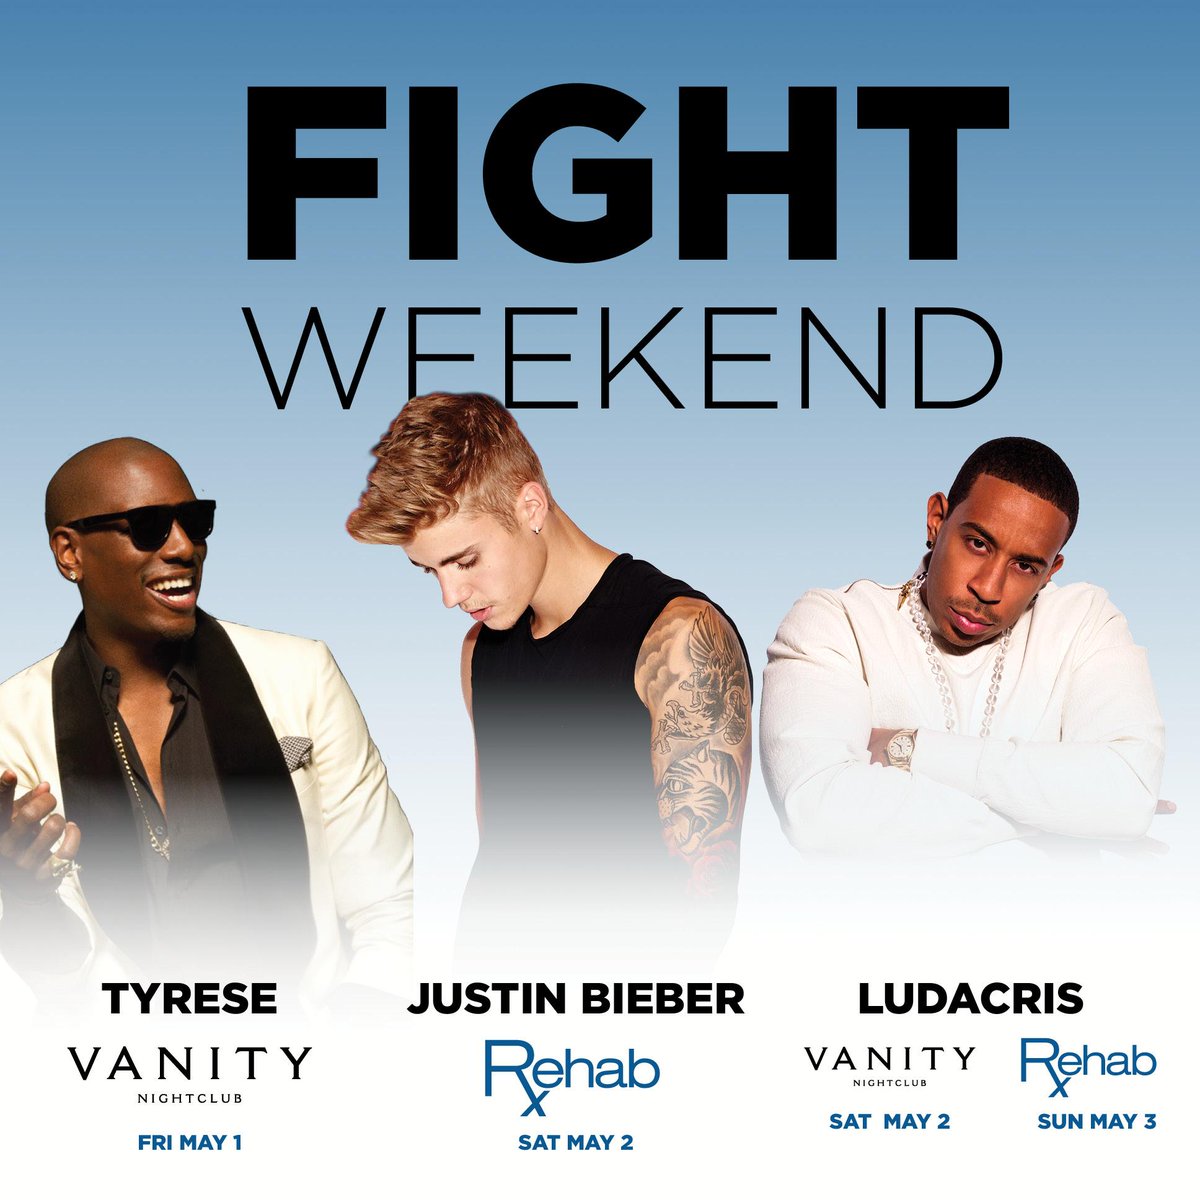 Who's ready for Fight Weekend? It's gonna be the biggest weekend of the year! hrhc.lv/1Dz7F9K